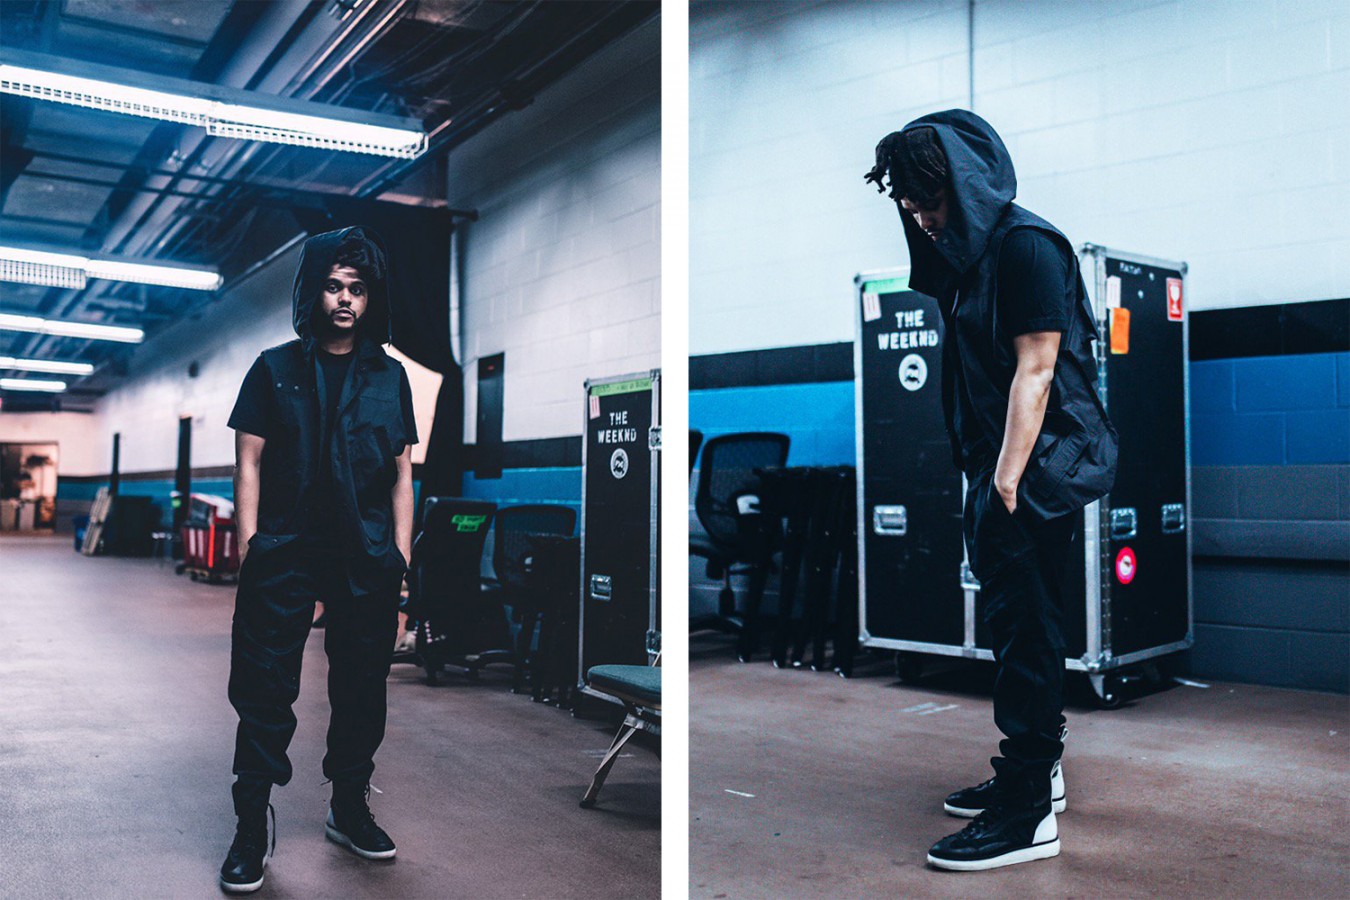 A First Look At The Weeknd x Alexander Wang Collaboration